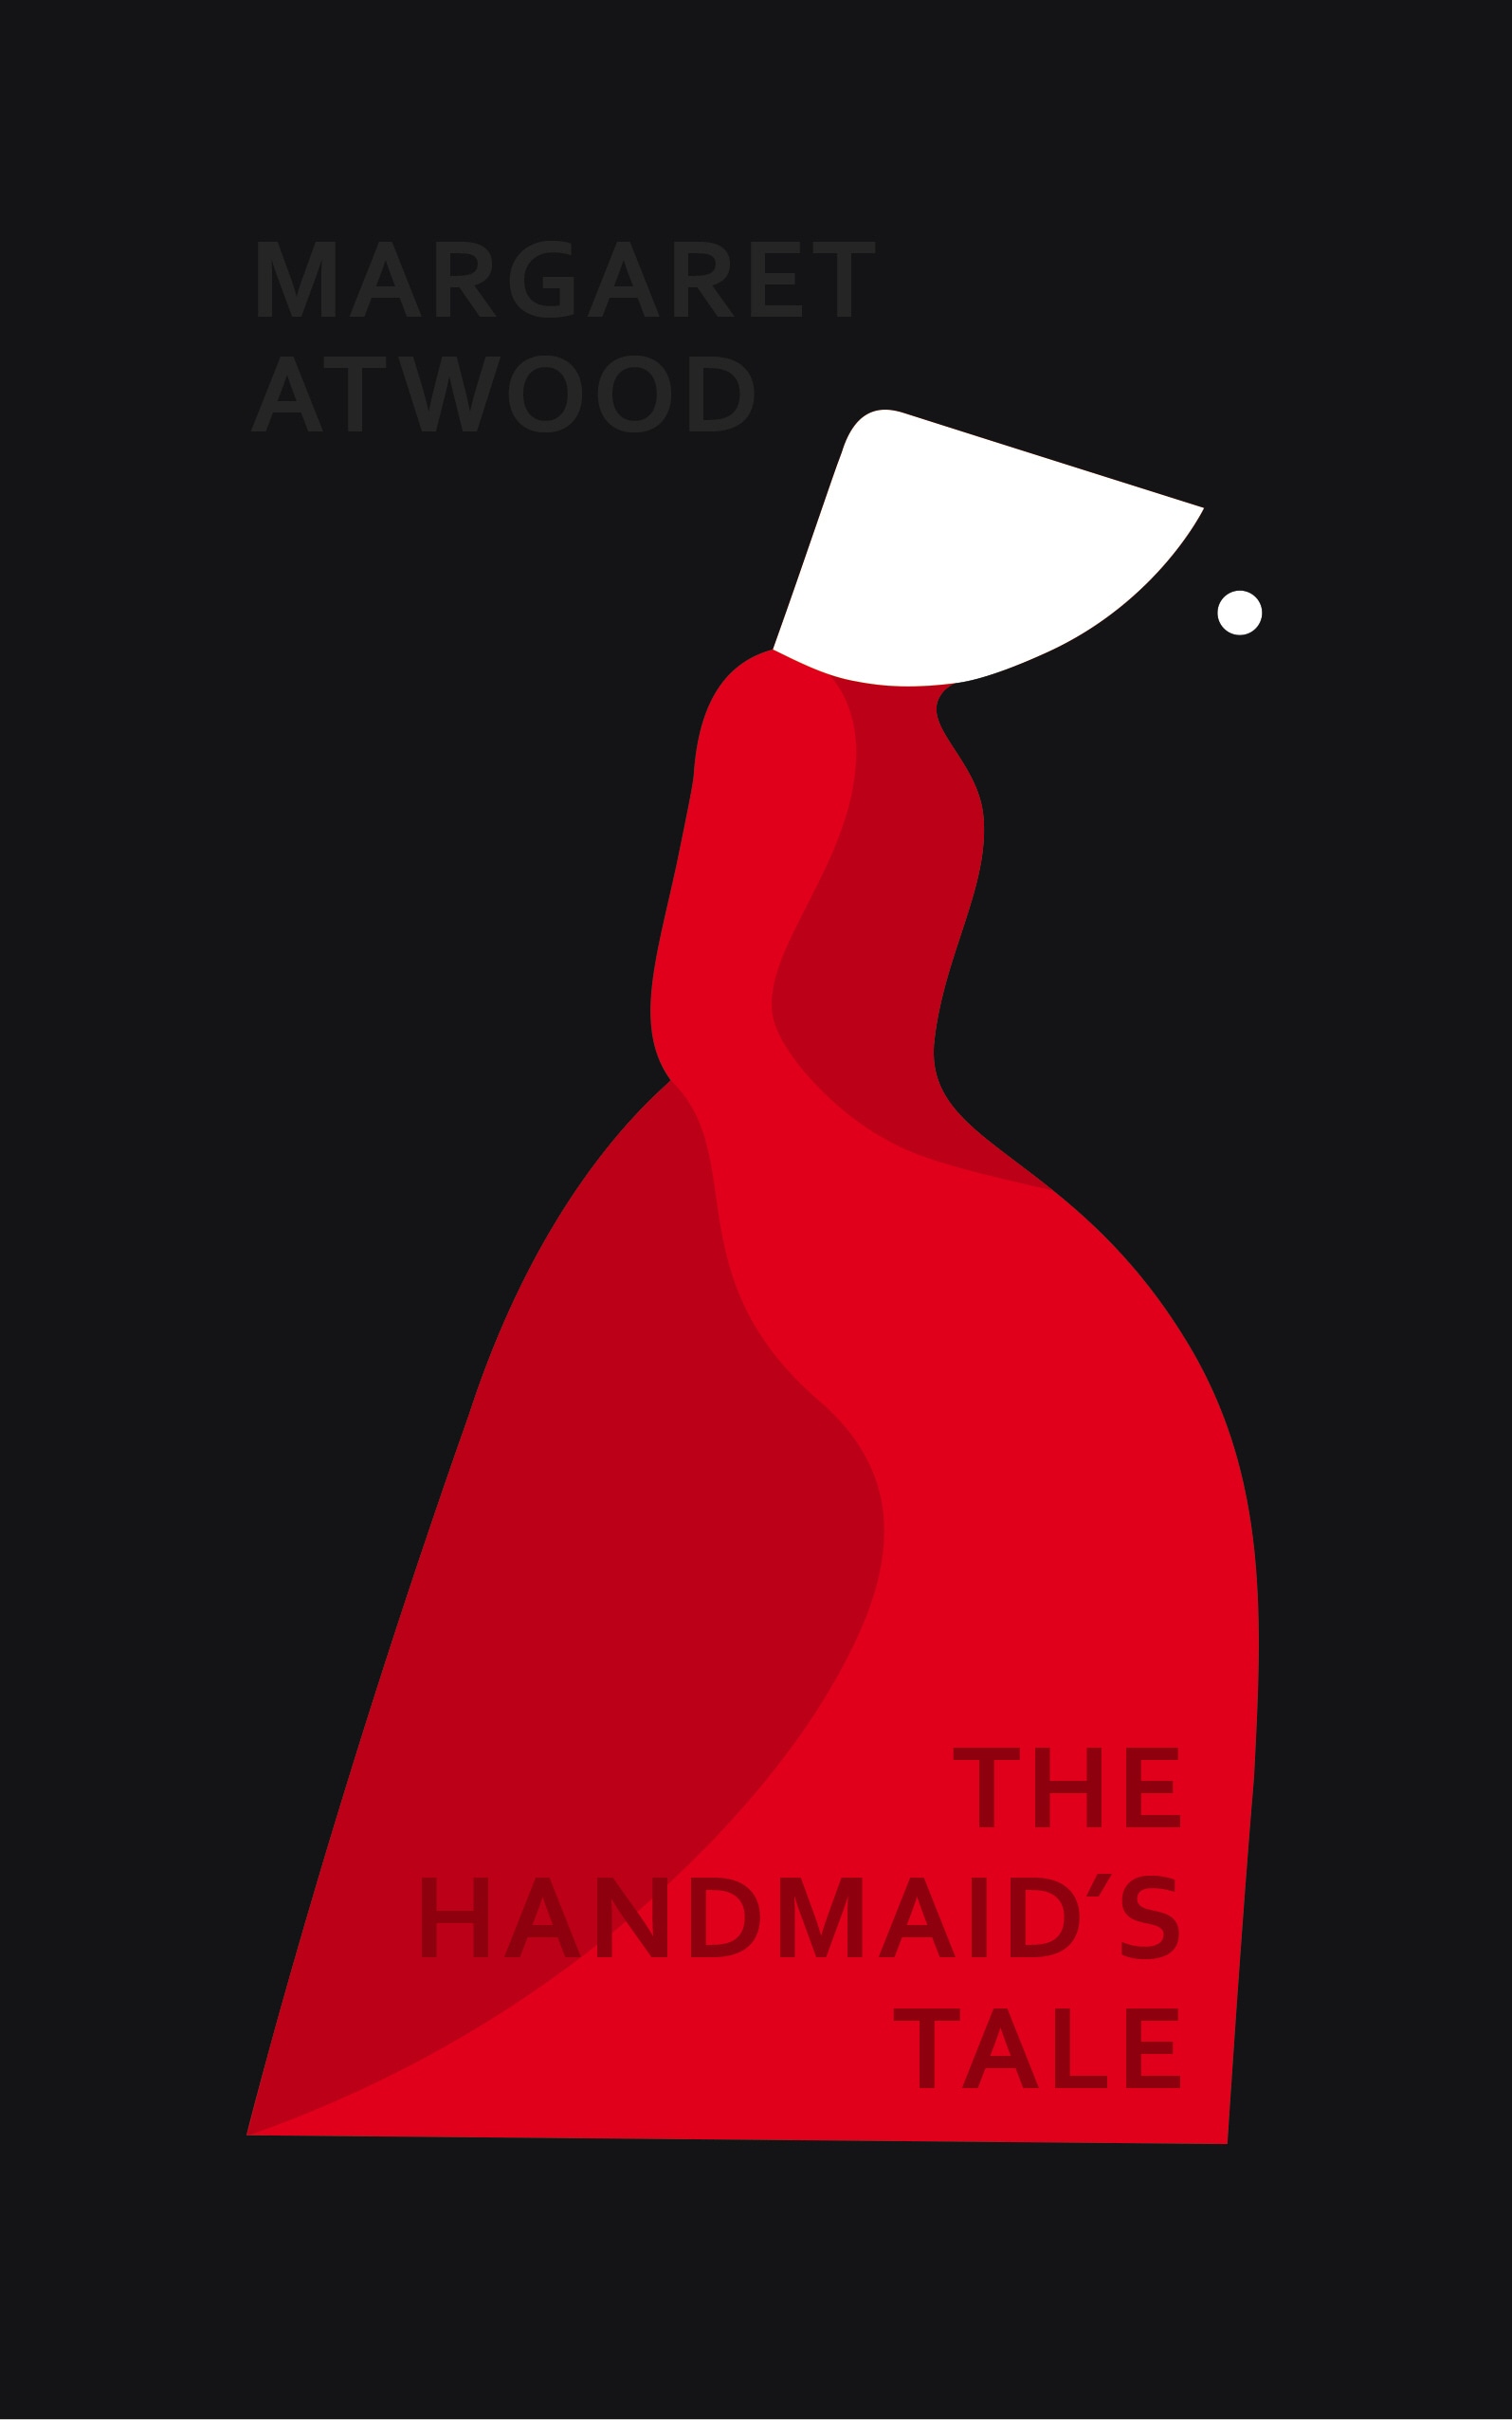 Book “The Handmaid's Tale” by Margaret Atwood — October 5, 2017